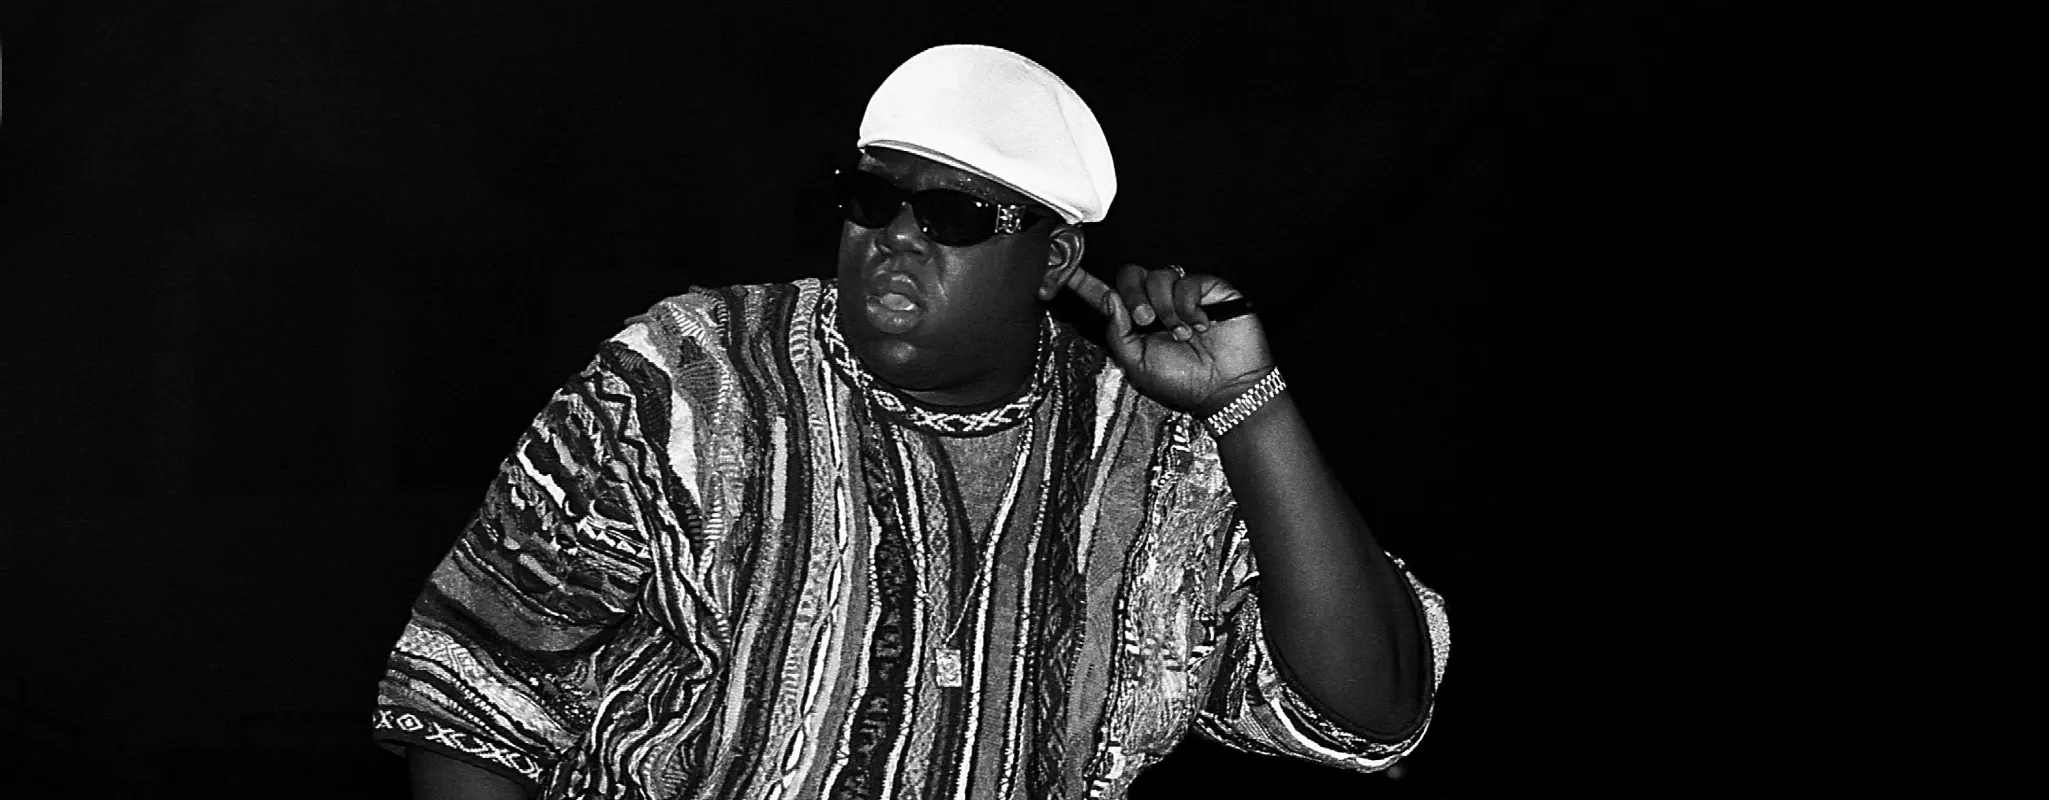 The Late Notorious B.I.G. to Headline Virtual Reality Concert in the Metaverse